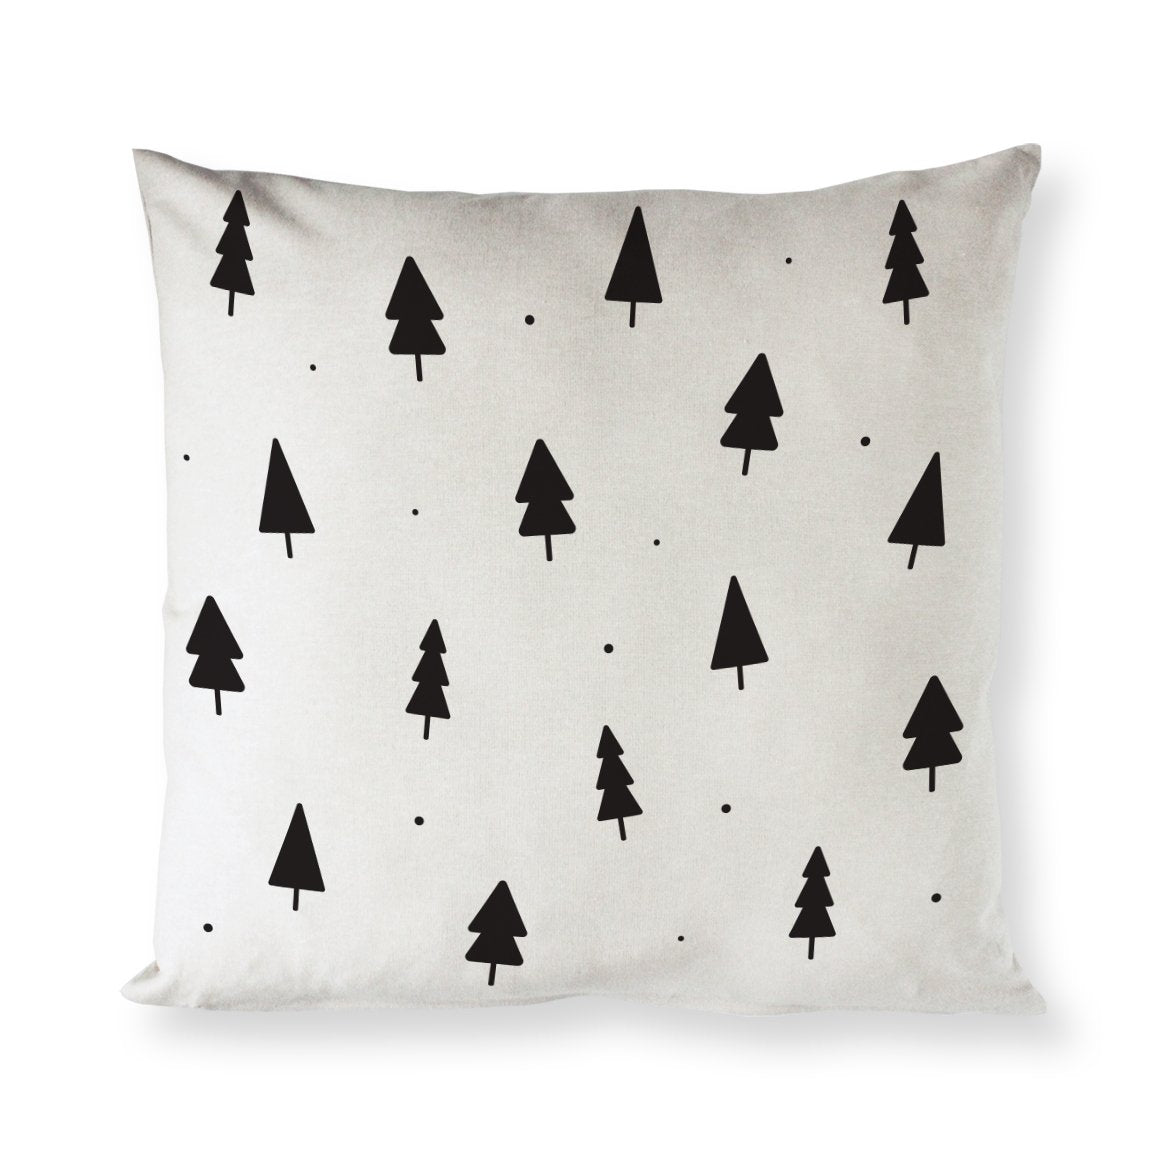 Christmas Trees Cotton Canvas Holiday Pillow Cover